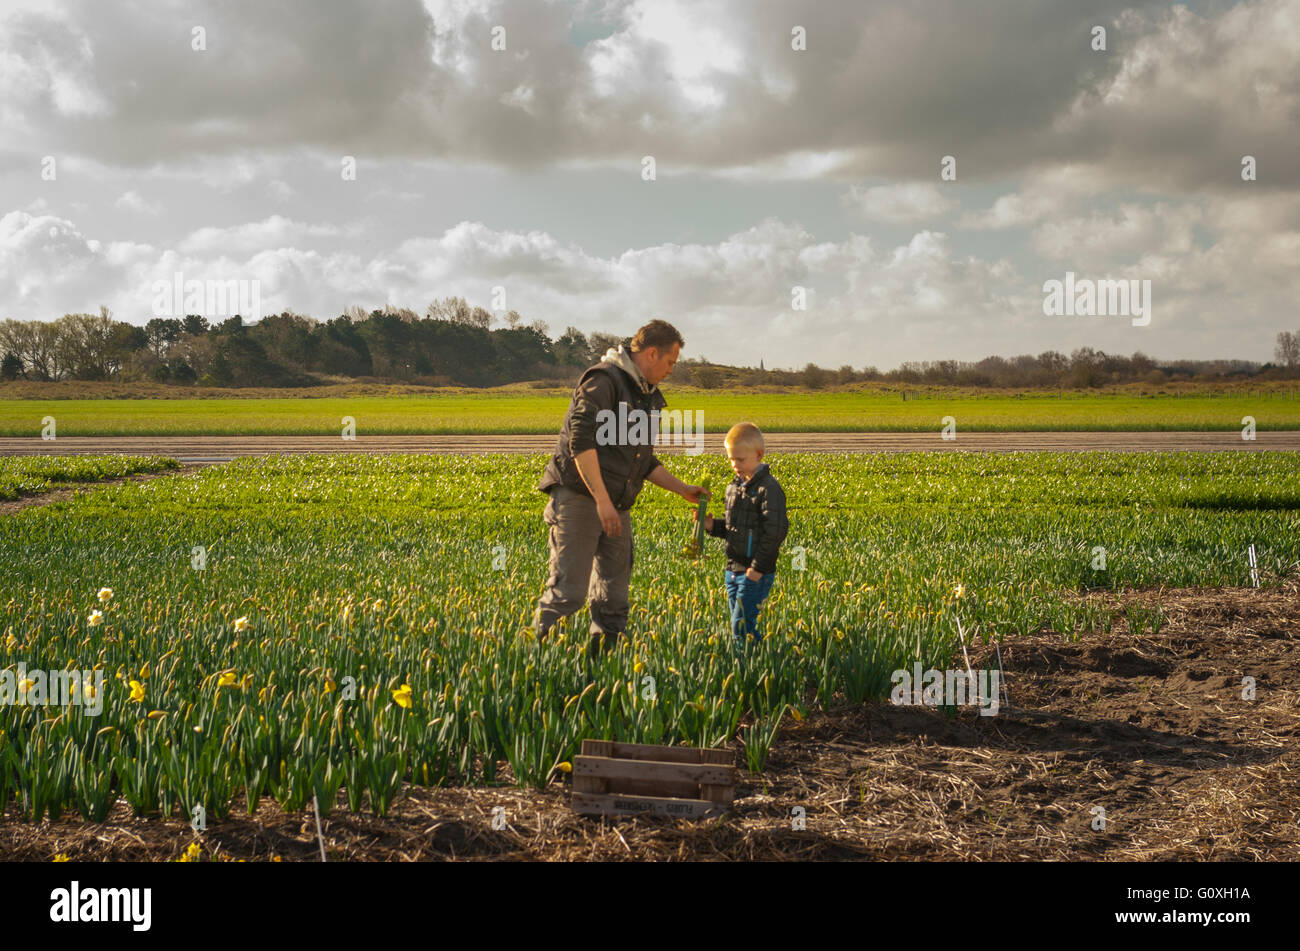 Working together on the flower fields. Dad hands the bunches of daffodils to his son, to bring them to the car. 6 of 6 Stock Photo